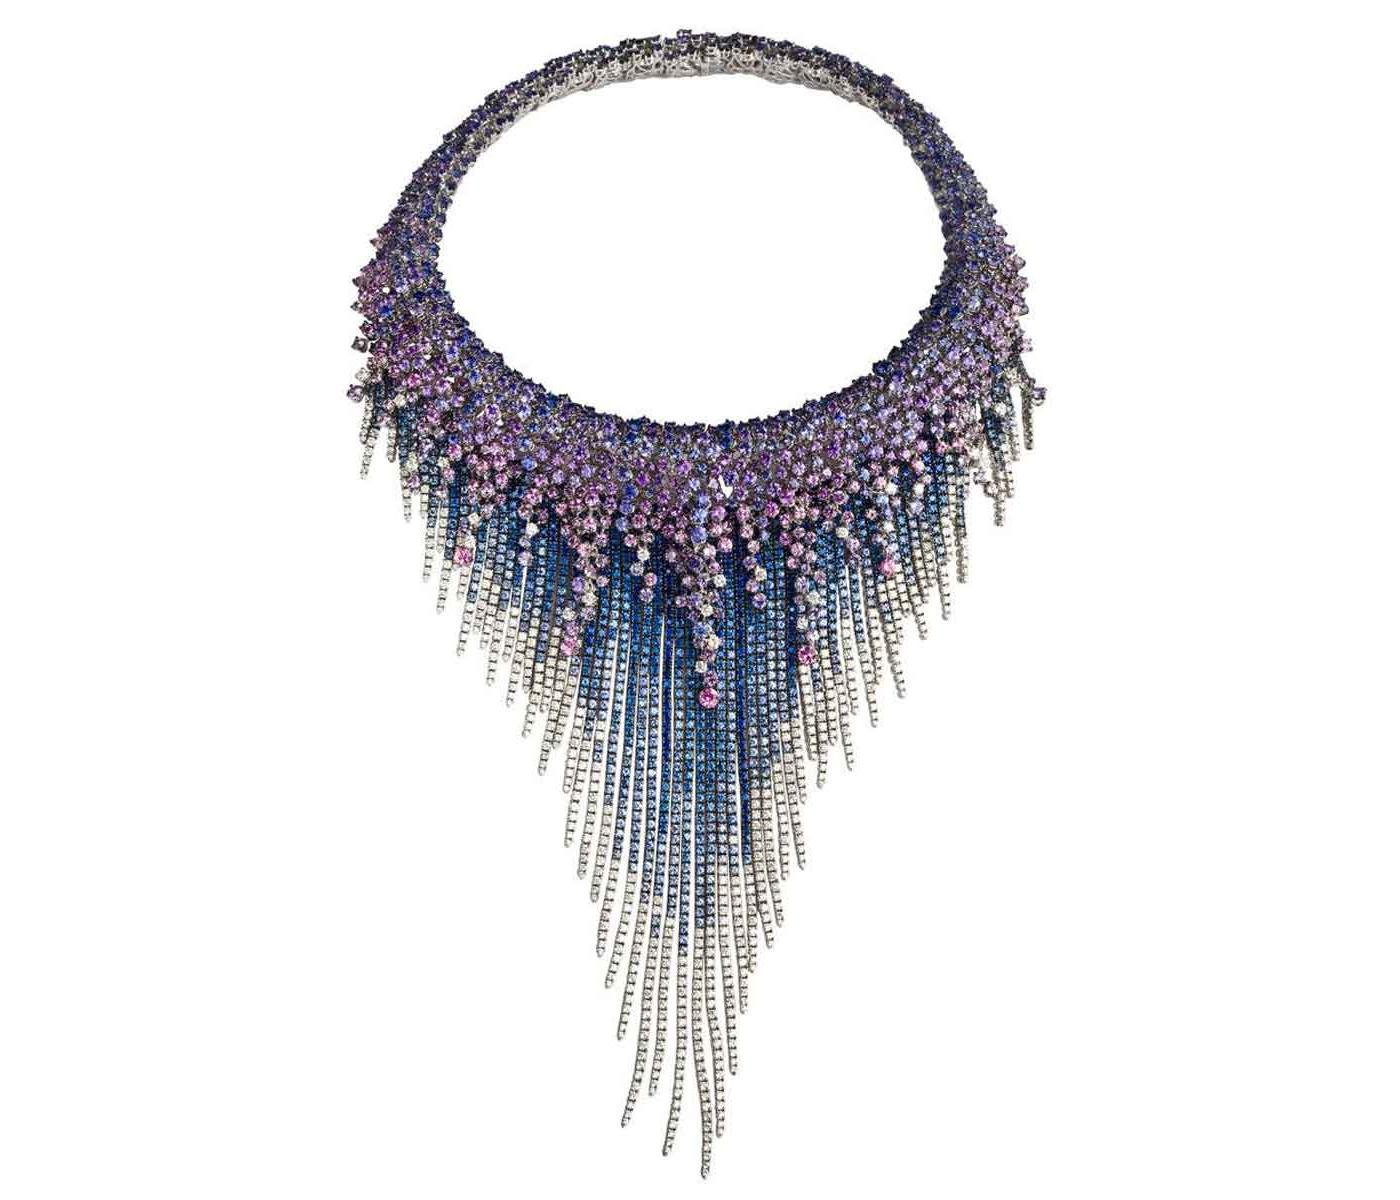 Necklace by Damiani